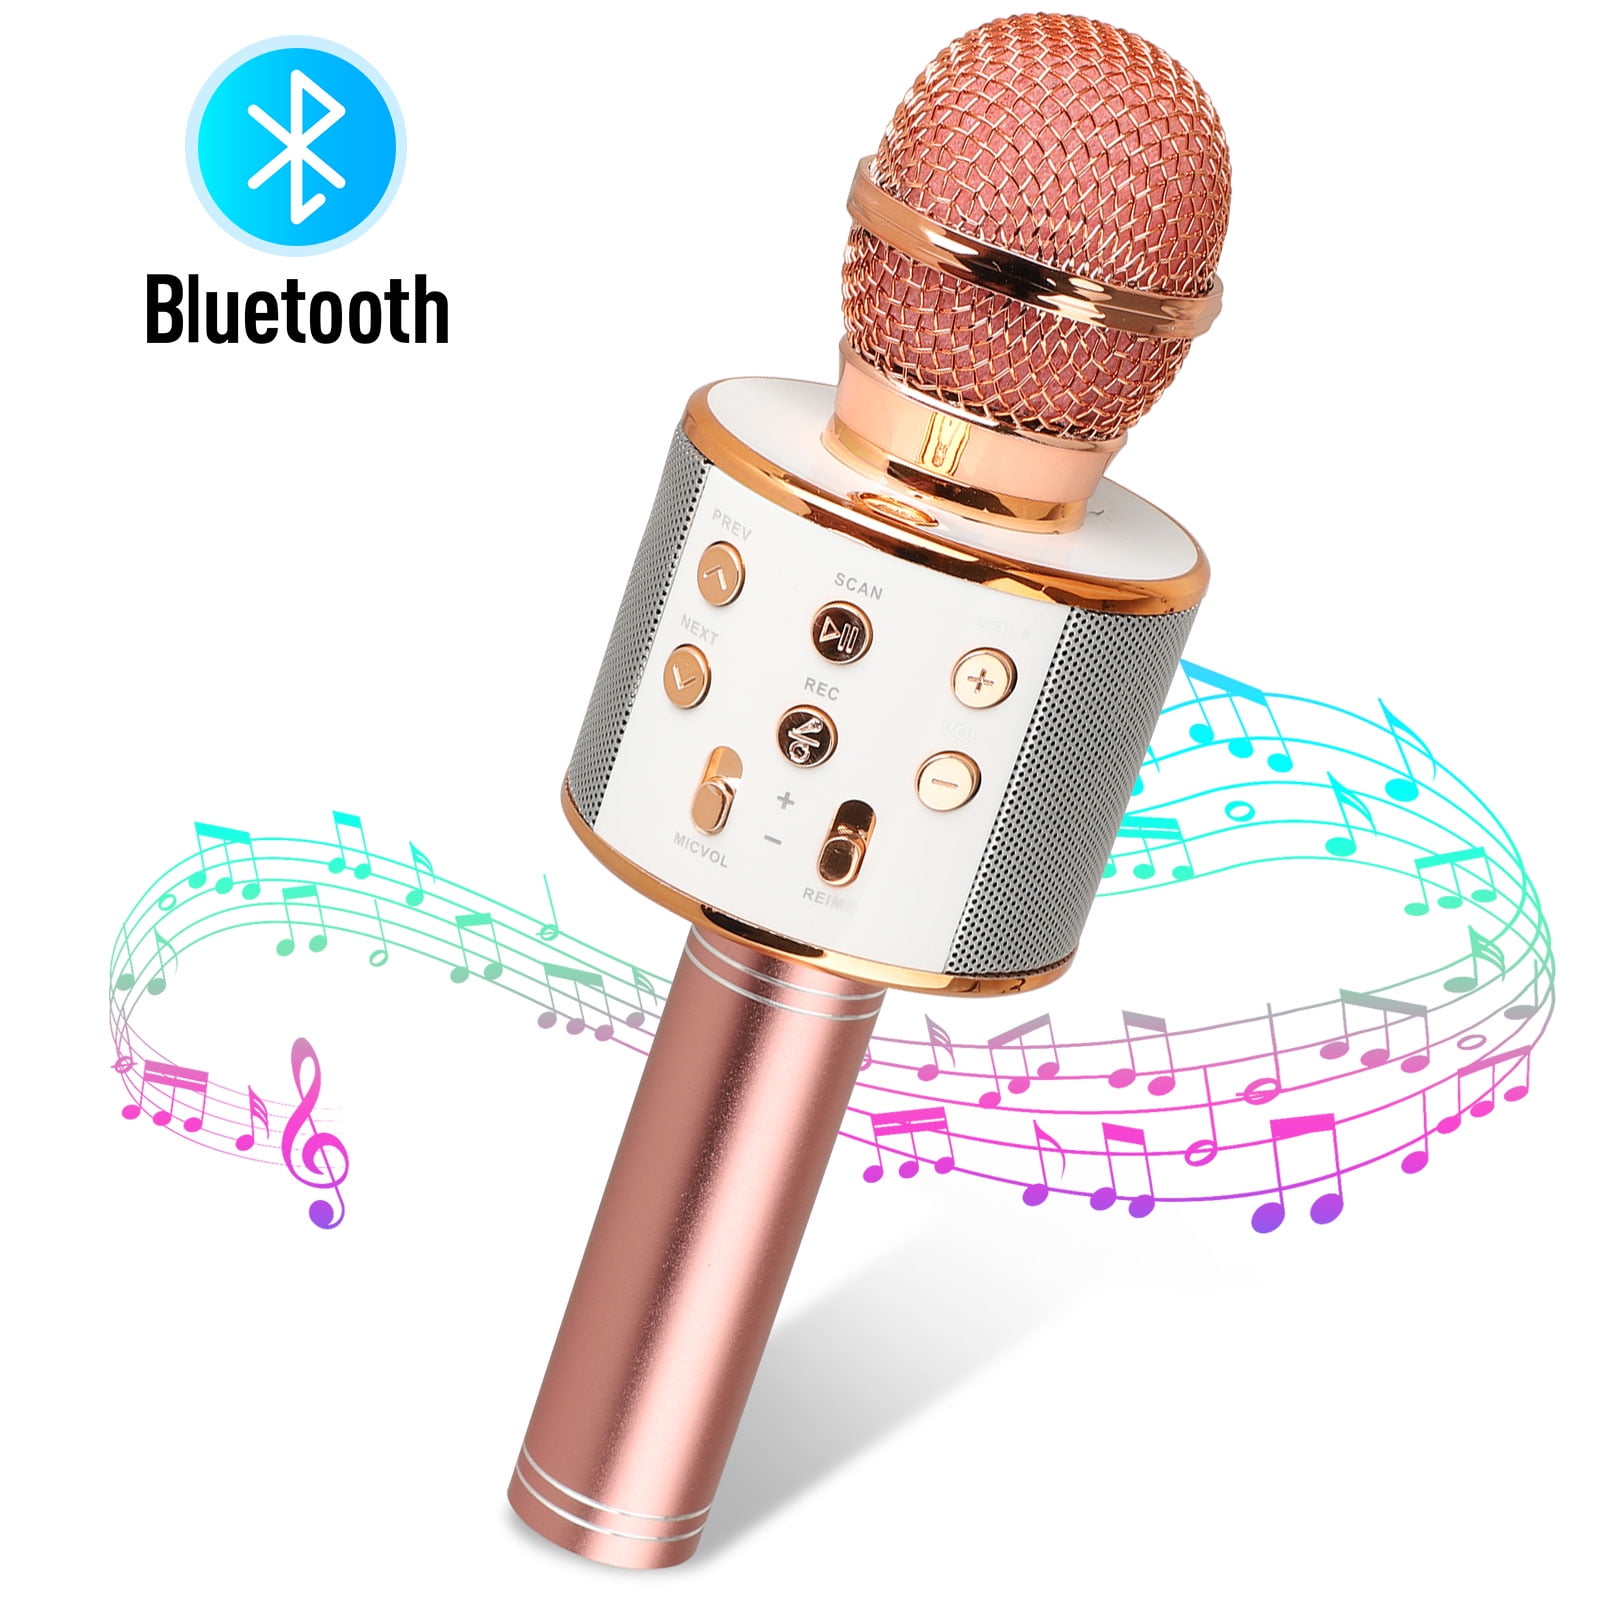 3 in 1 Karaoke Mic & Speaker Blackcherry M1 Handheld Wireless 2000mAh Microphone & Player Captible for iPhone Android APPs for Home Party Outdoor Streaming Podcasting Recording Blue